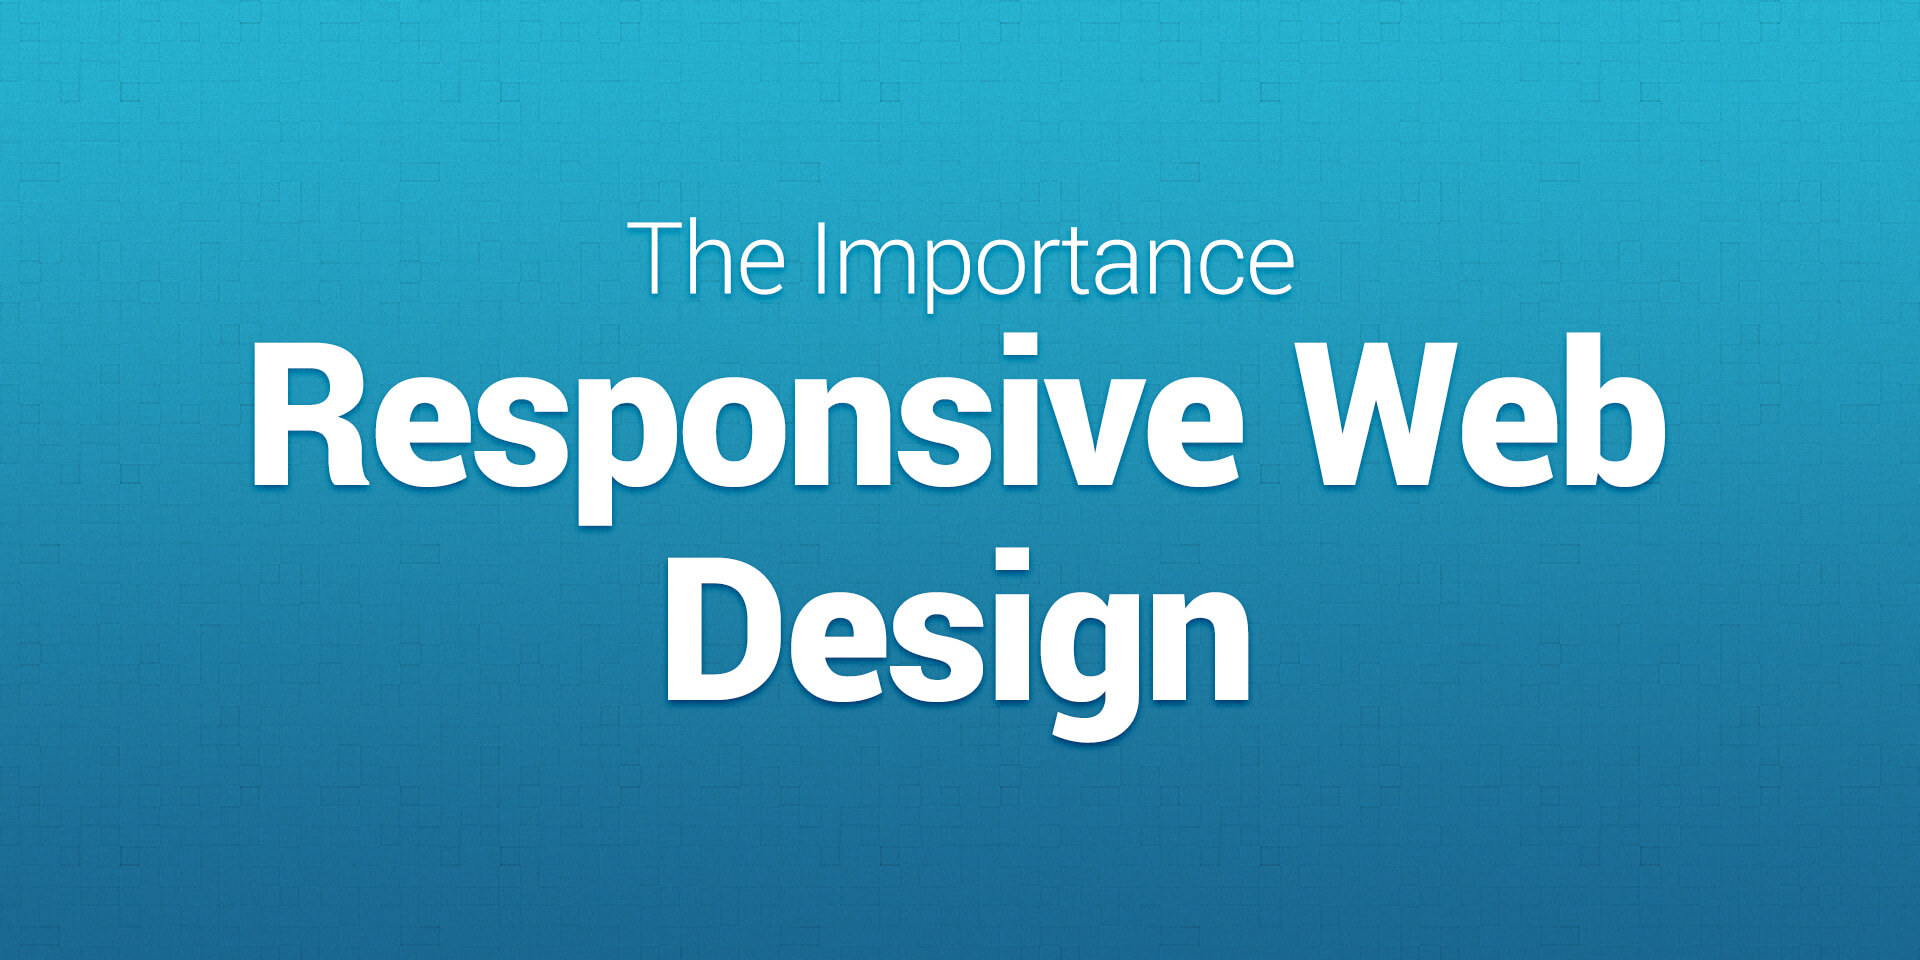 The Importance of responsive website design